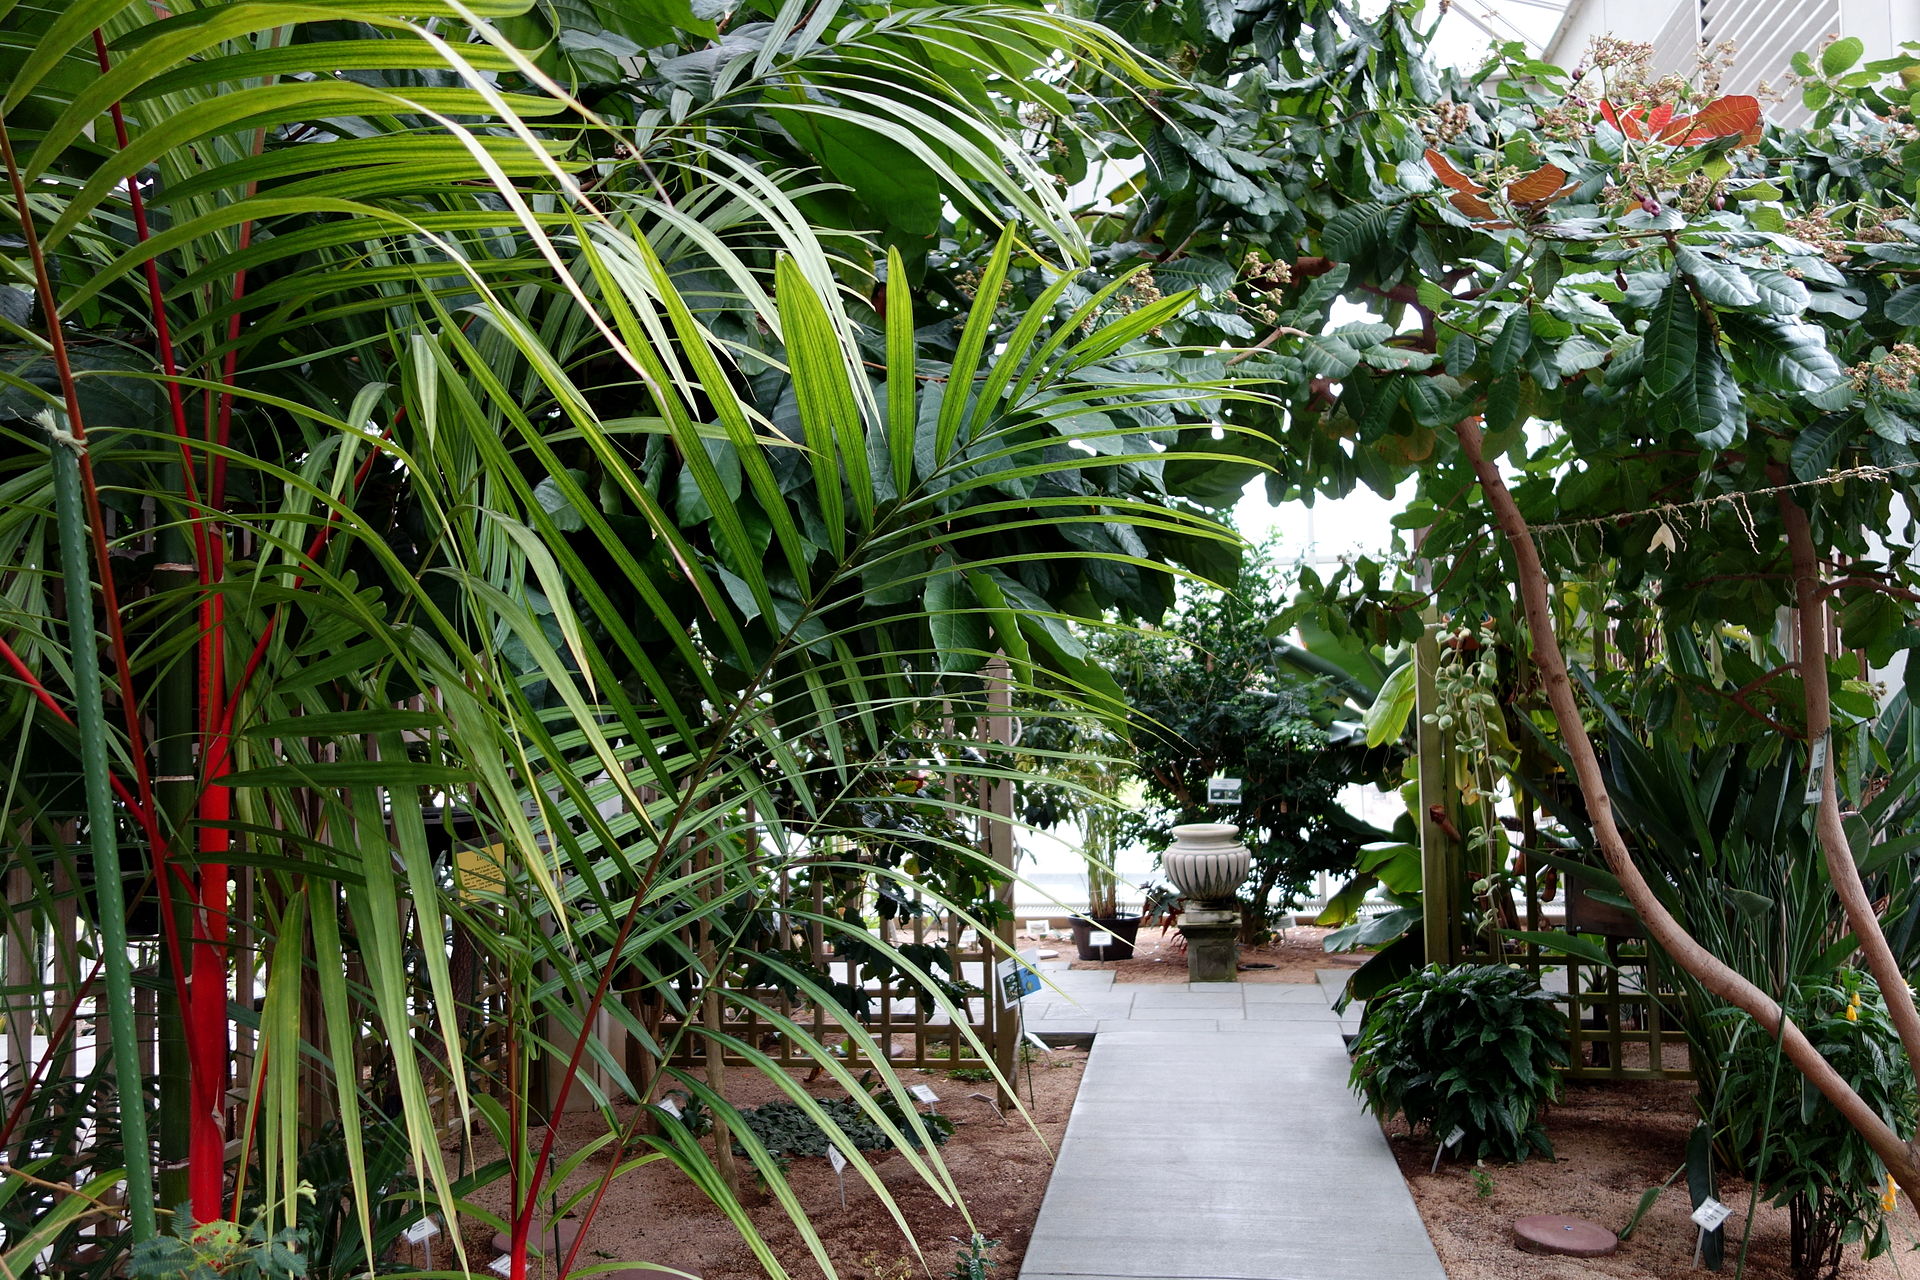 Interior of the conservatory